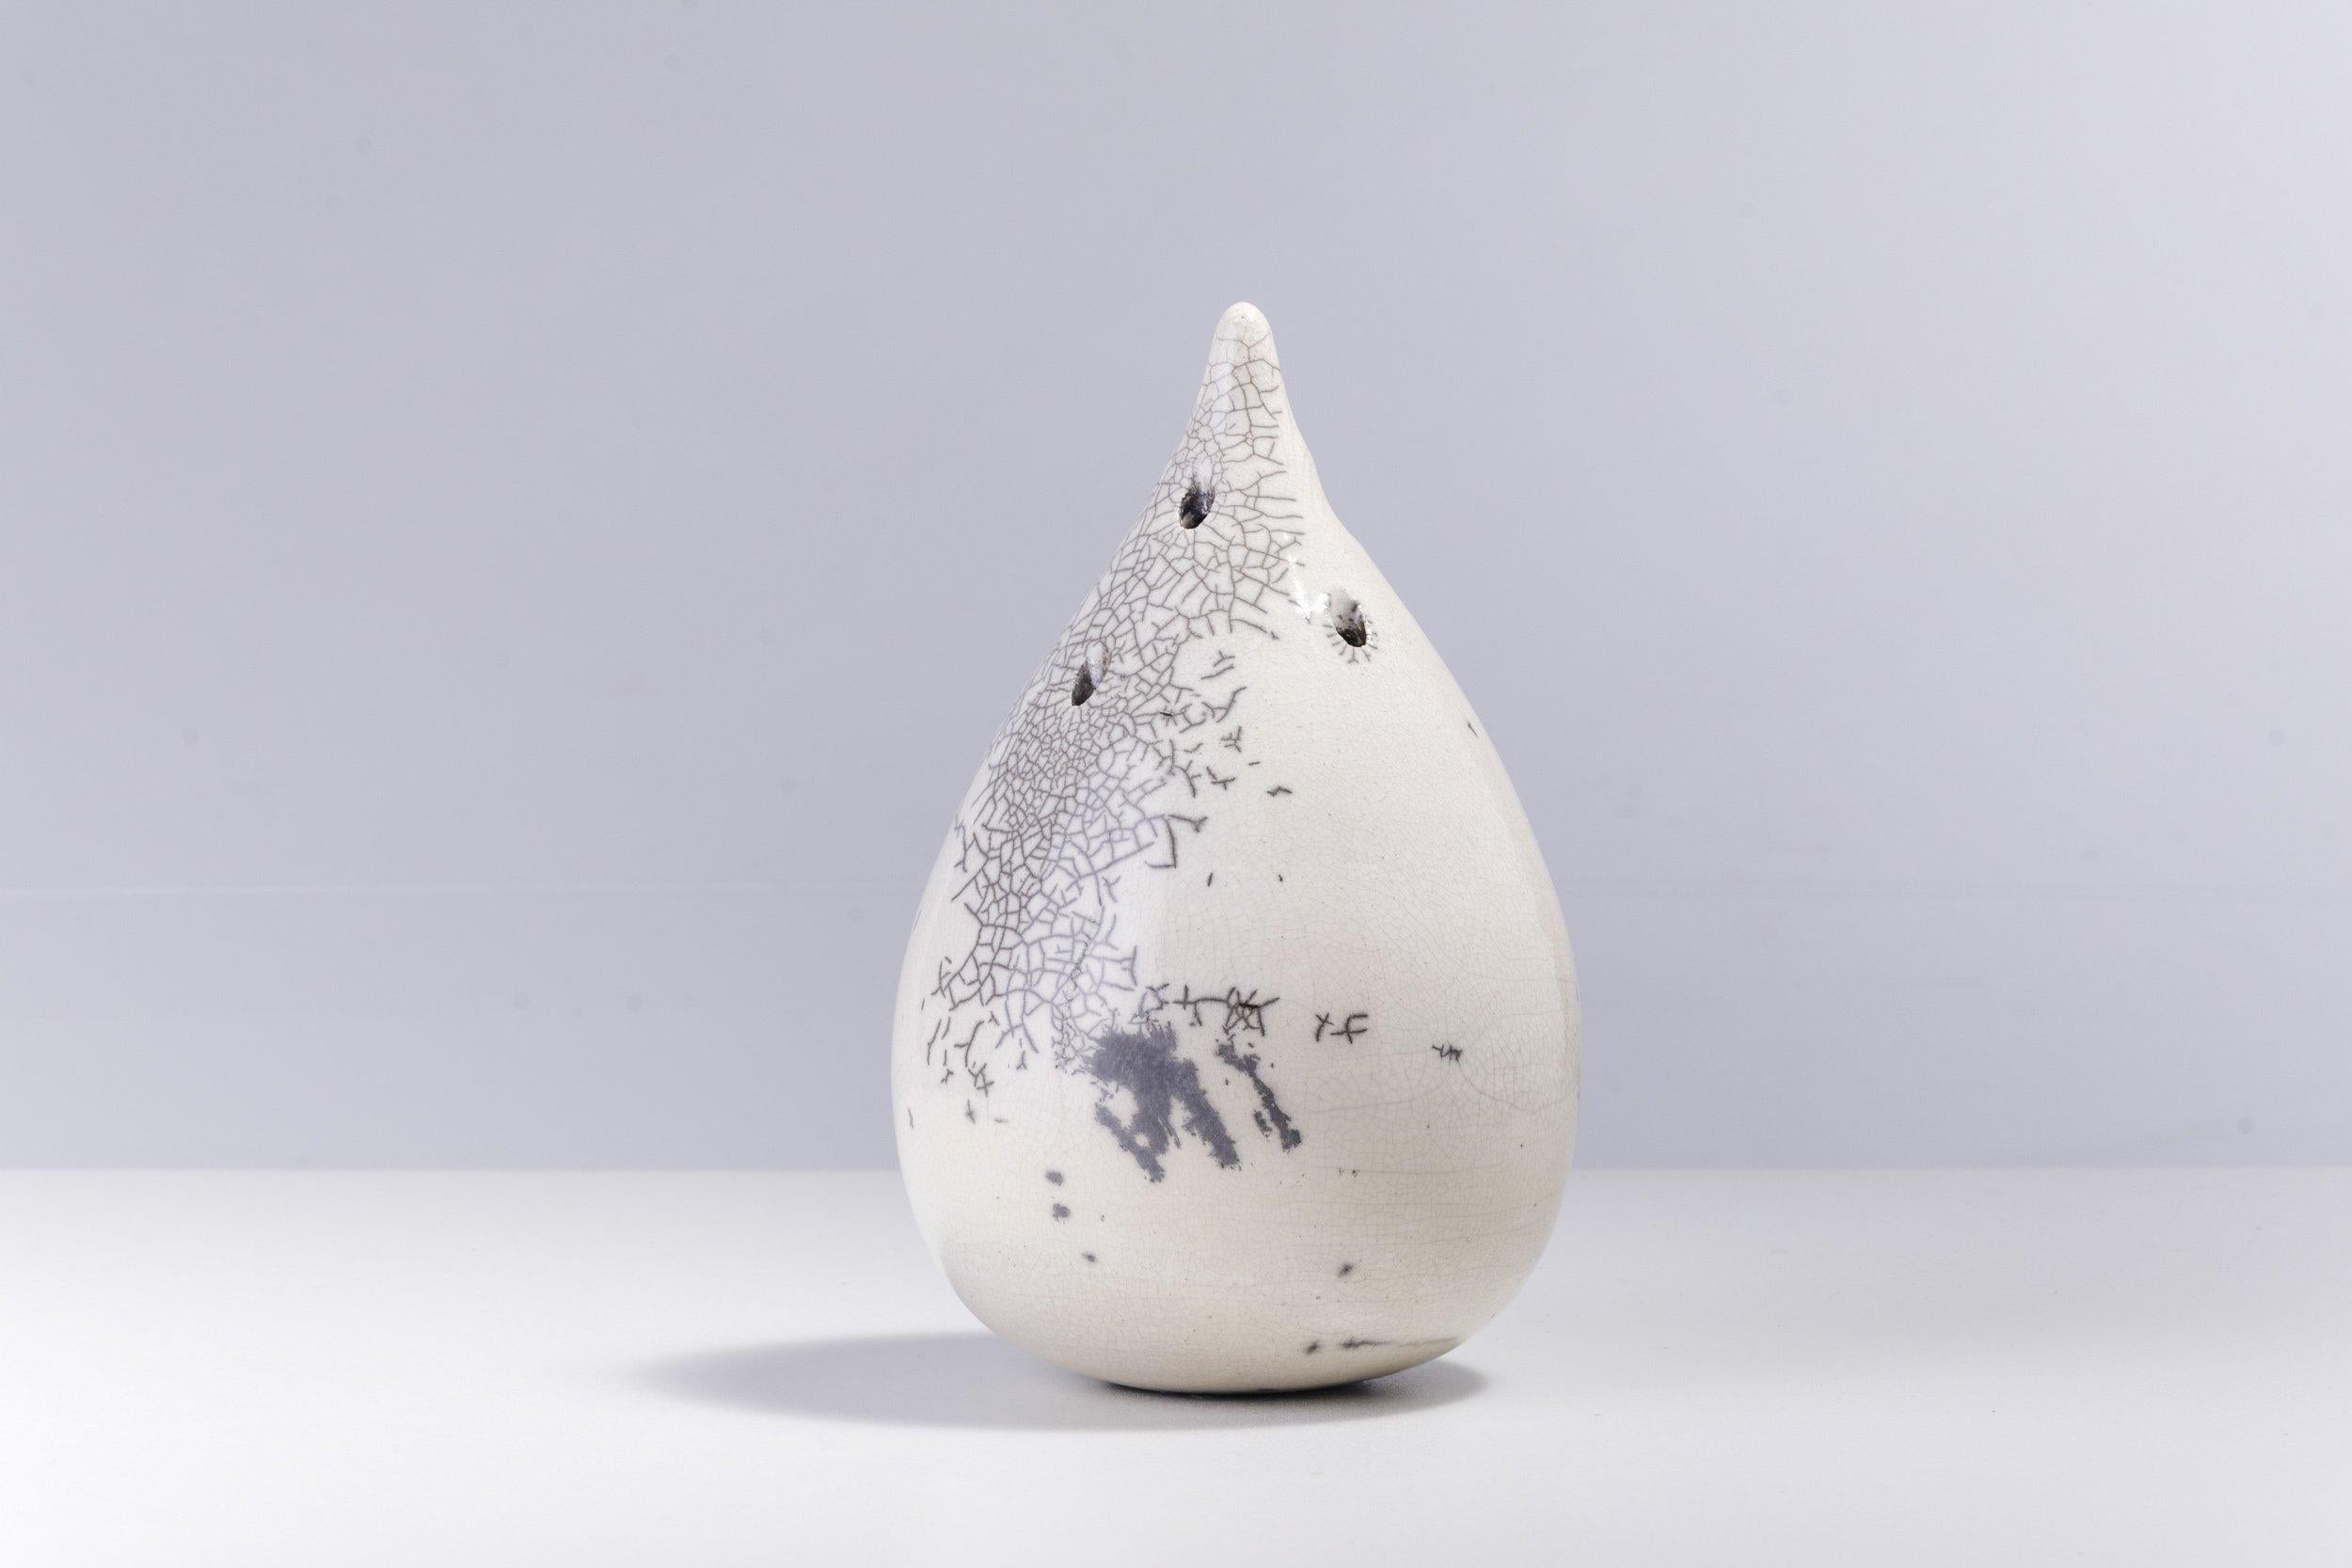 Japanese Modern LAAB Goccia Incense Holder L Raku Ceramics White Crackle In New Condition For Sale In monza, Monza and Brianza